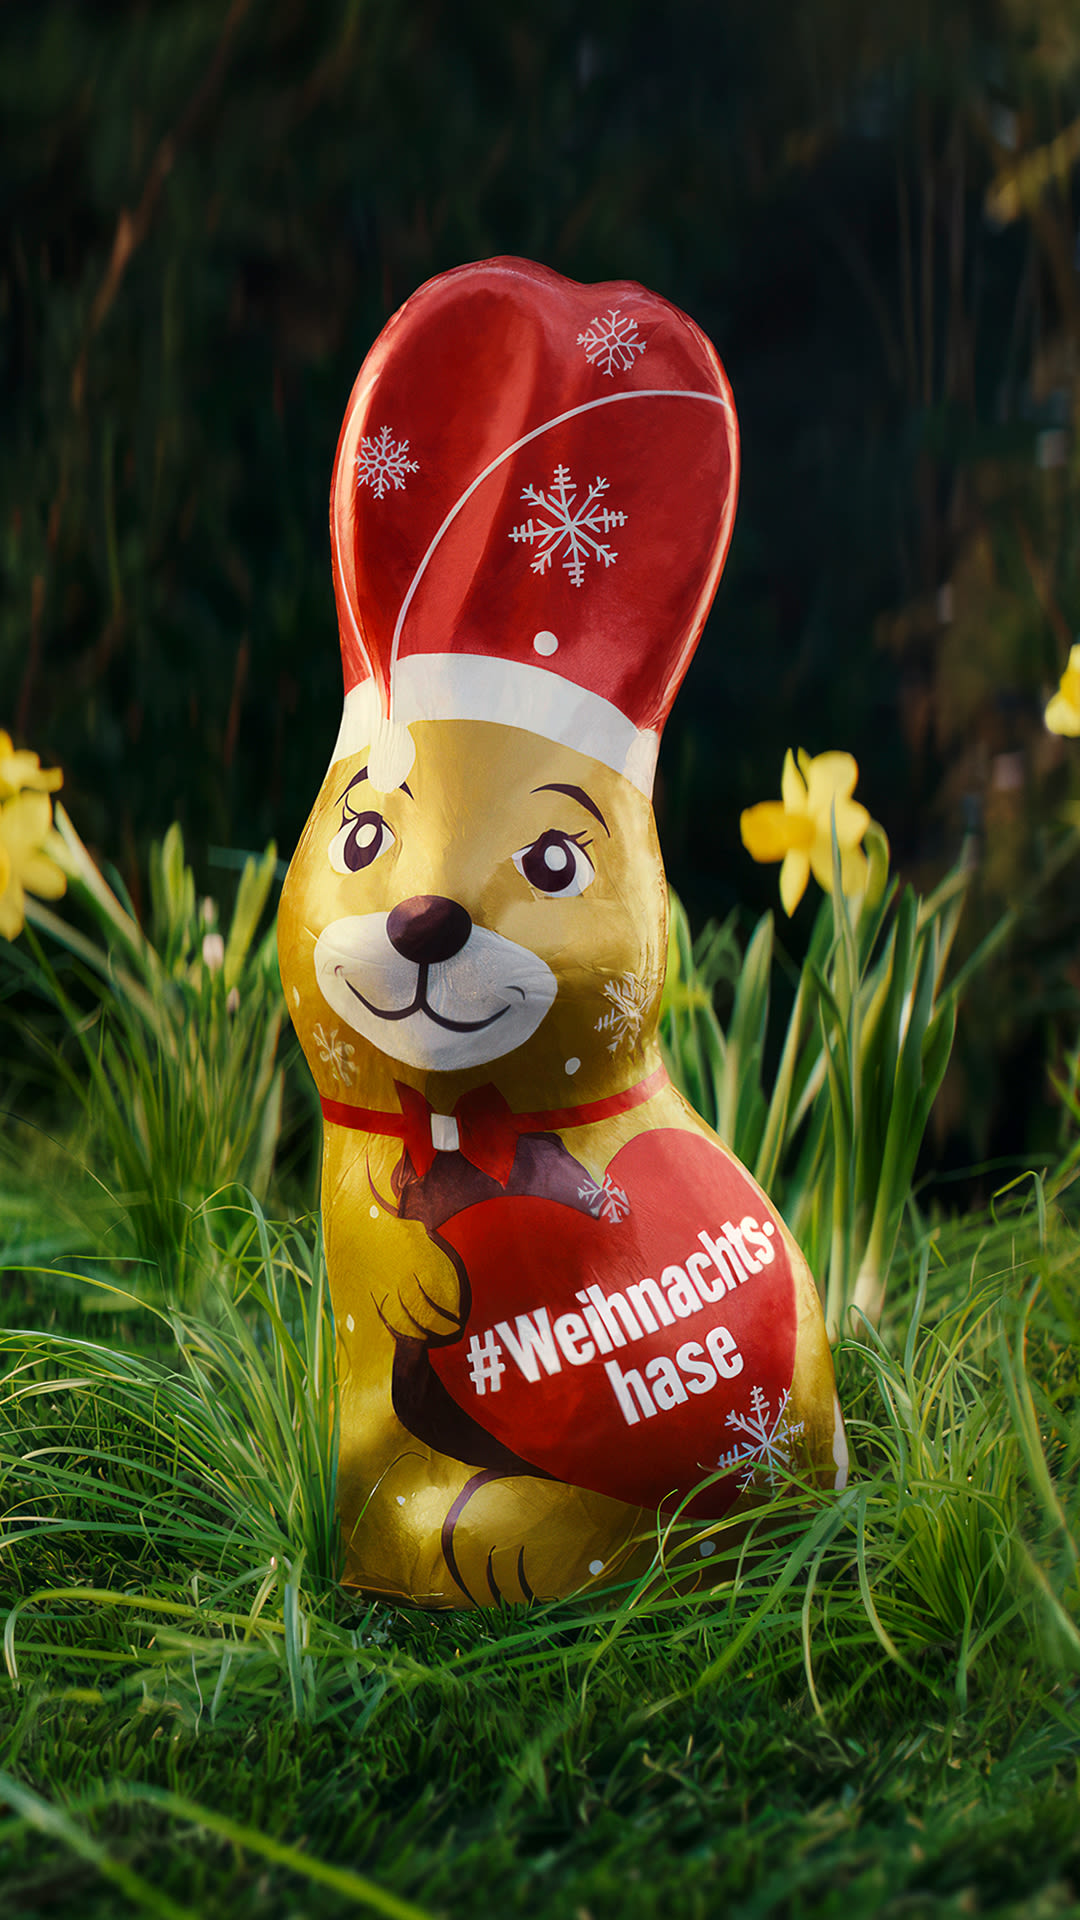 Jung von Matt HAMBURG’s christmas campaign TVC for for retailer chain EDEKA thematising alzheimer's disease: a chocolate easter bunny dressed as santa claus standing in green grass with with daffodils in the background